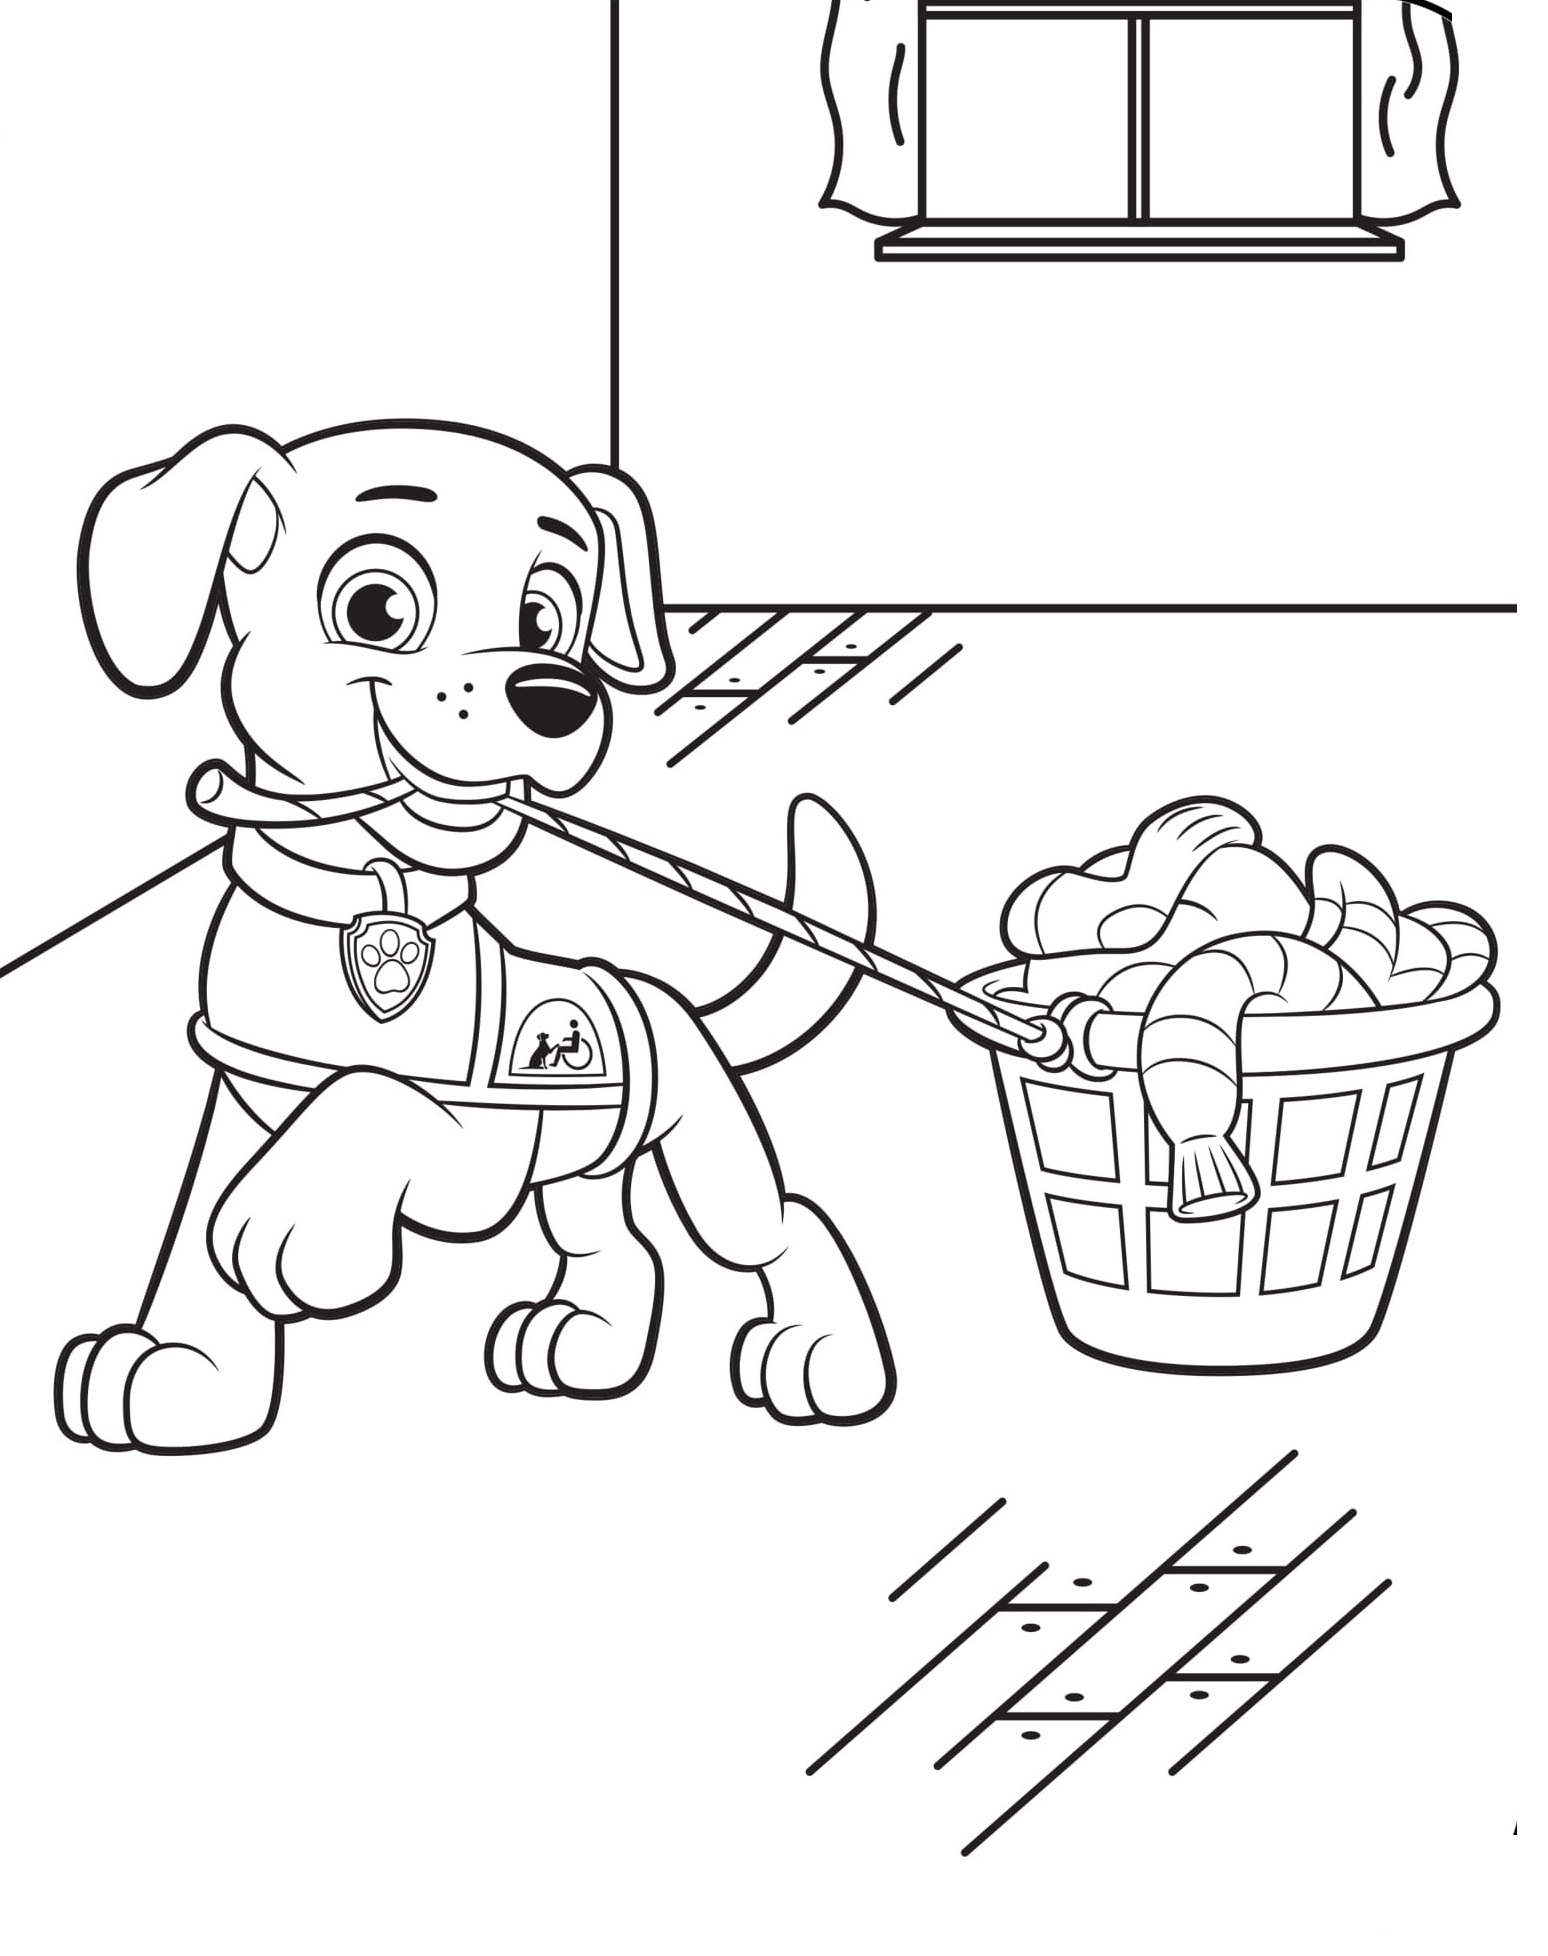 Canine Companions For Independence Helping Coloring Page